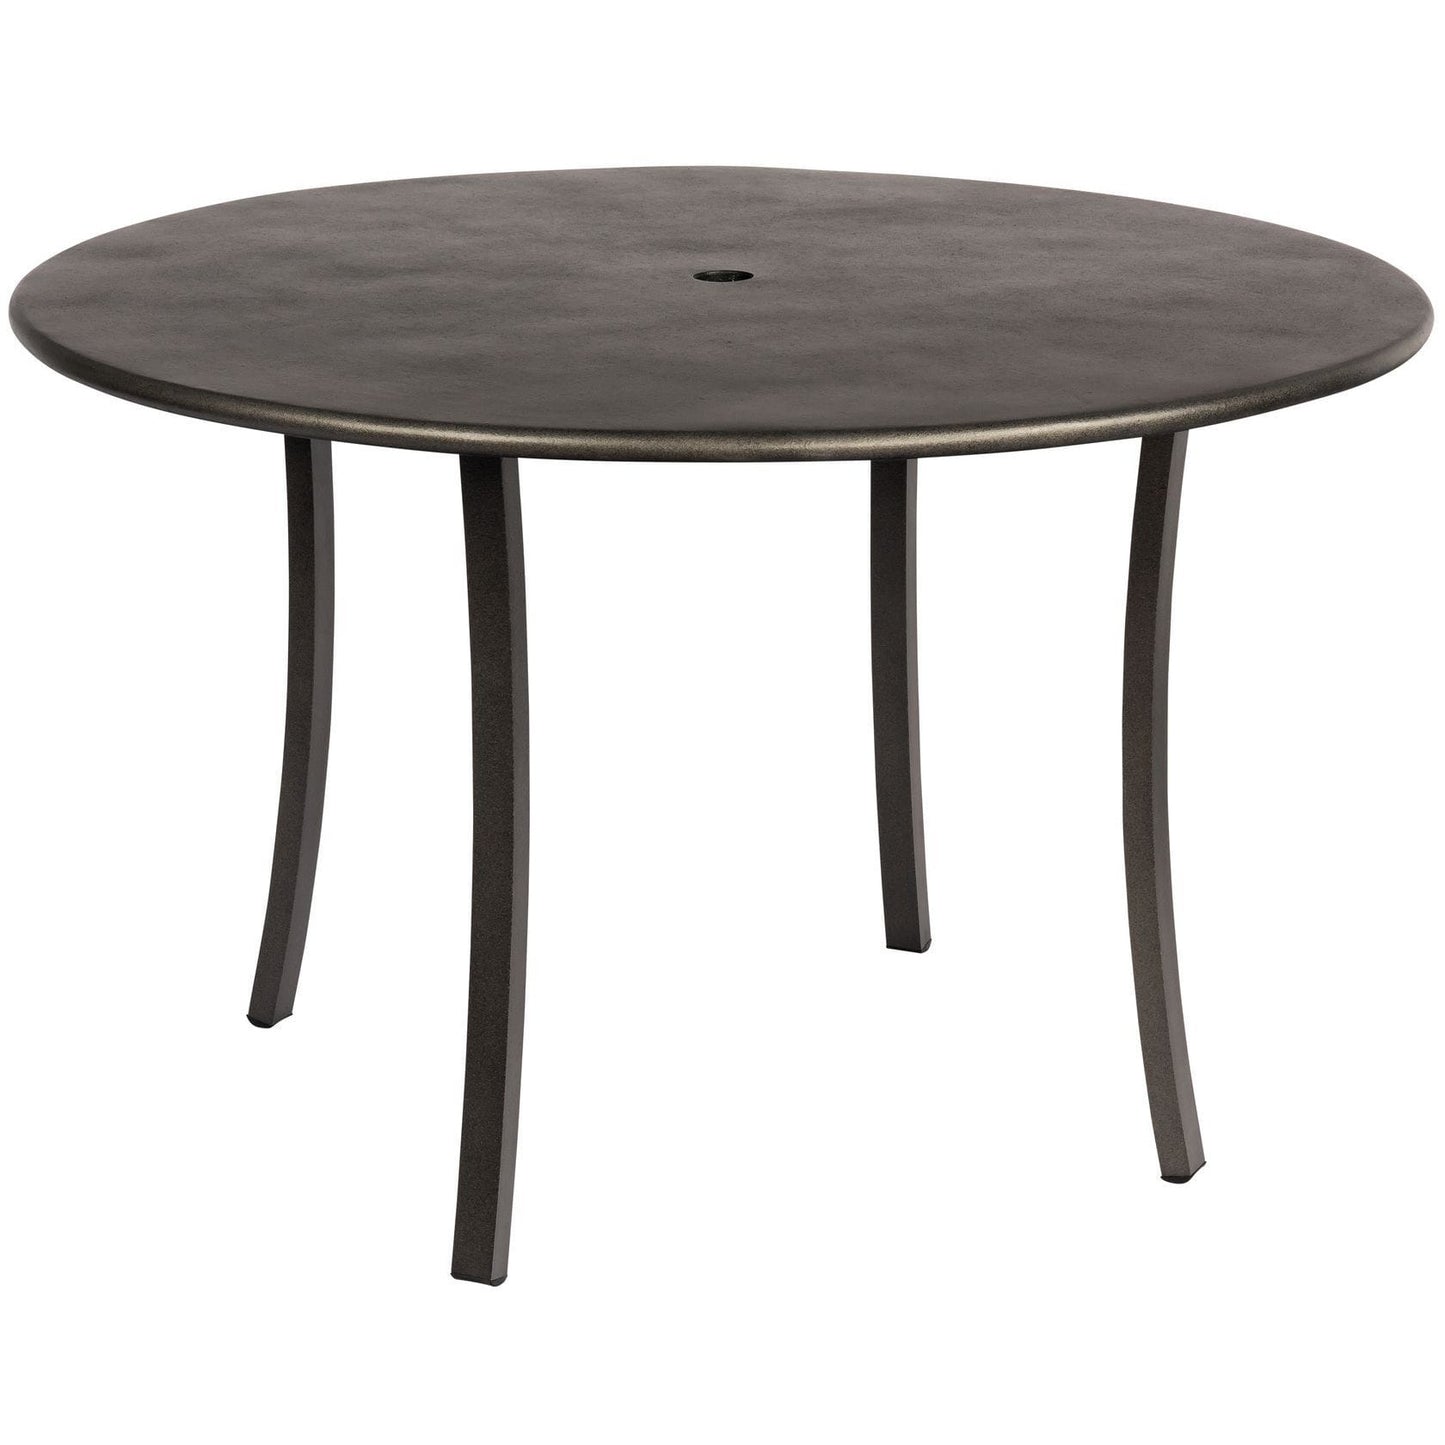 48 Inch Round Umbrella Table S508702 Woodard Outdoor Patio | Canaveral Collection Seating Woodard 